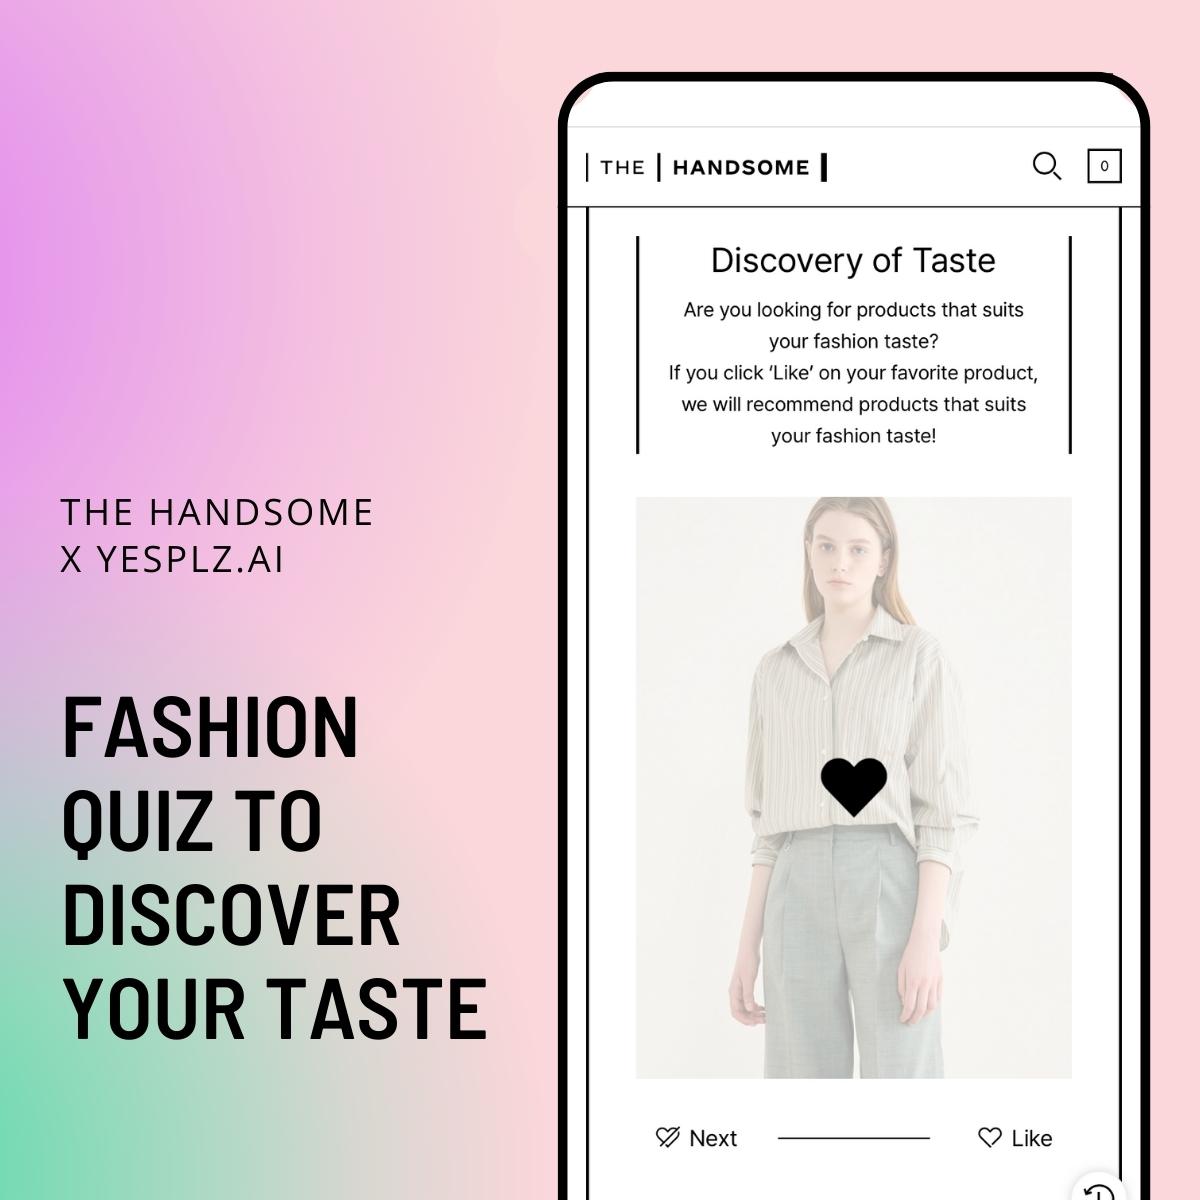 A fashion quiz by YesPlz AI for The Handsome shoppers